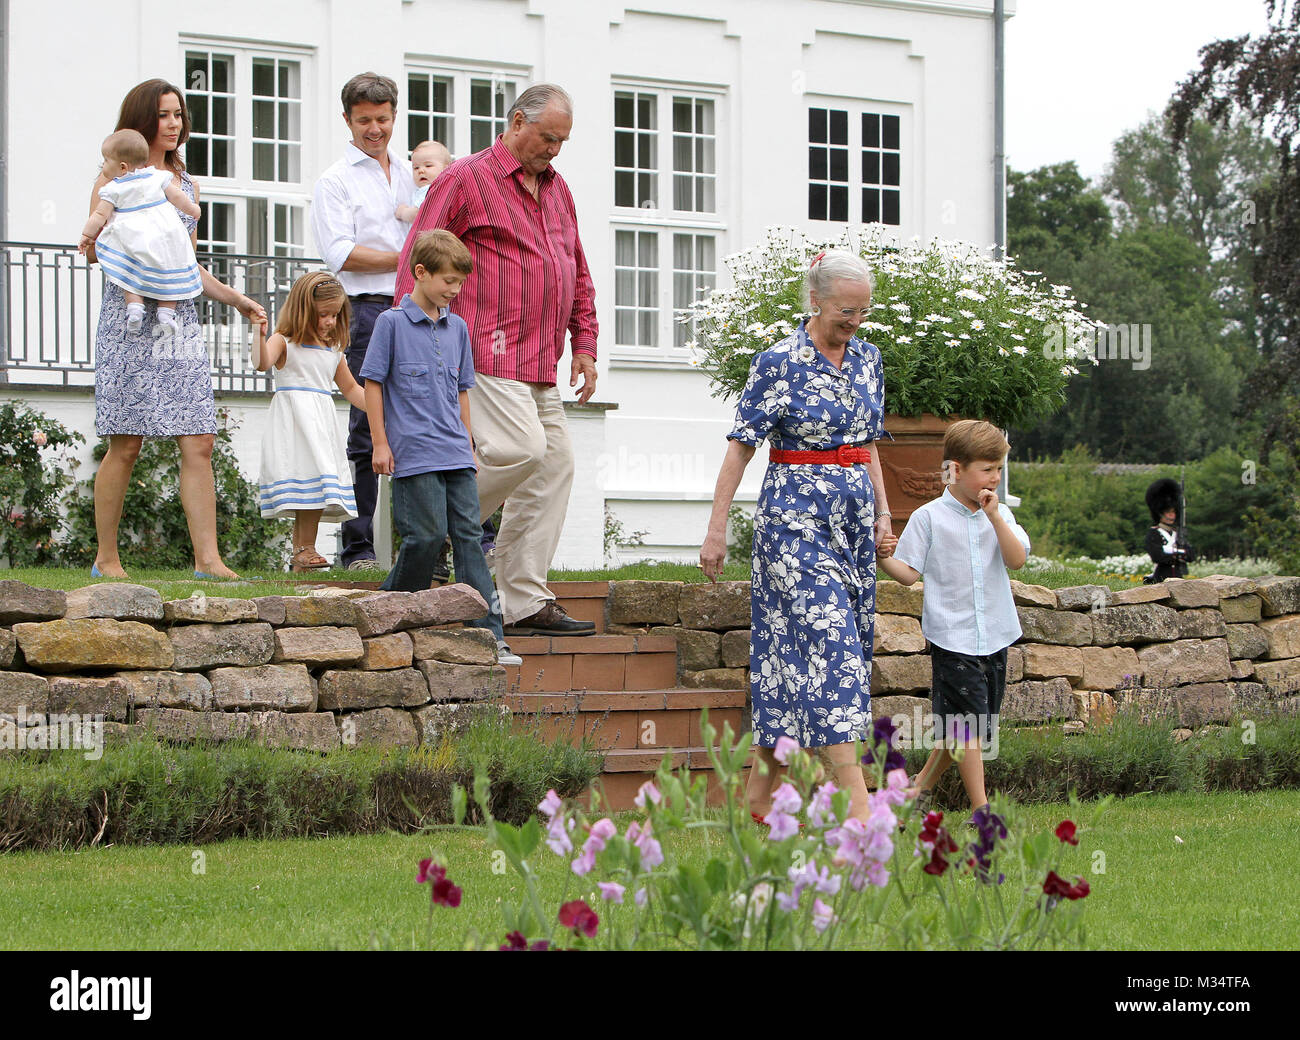 Grasten, Denmark. 1st Aug, 2011. The Danish Royal Family members Crown Prince Frederik (4th L) with son Prince Vincent, Crown Princess Mary (2nd L) with daughters Josephine and Isabella (3rd L), Queen Margrethe (2nd R) with Prince Christian (R) and Prince Consort Henrik with Prince Felix pose during the annual photo session at Graasten Palace in Grasten, Denmark, 1 August 2011. Credit: Albert Nieboer | usage worldwide/dpa/Alamy Live News Stock Photo